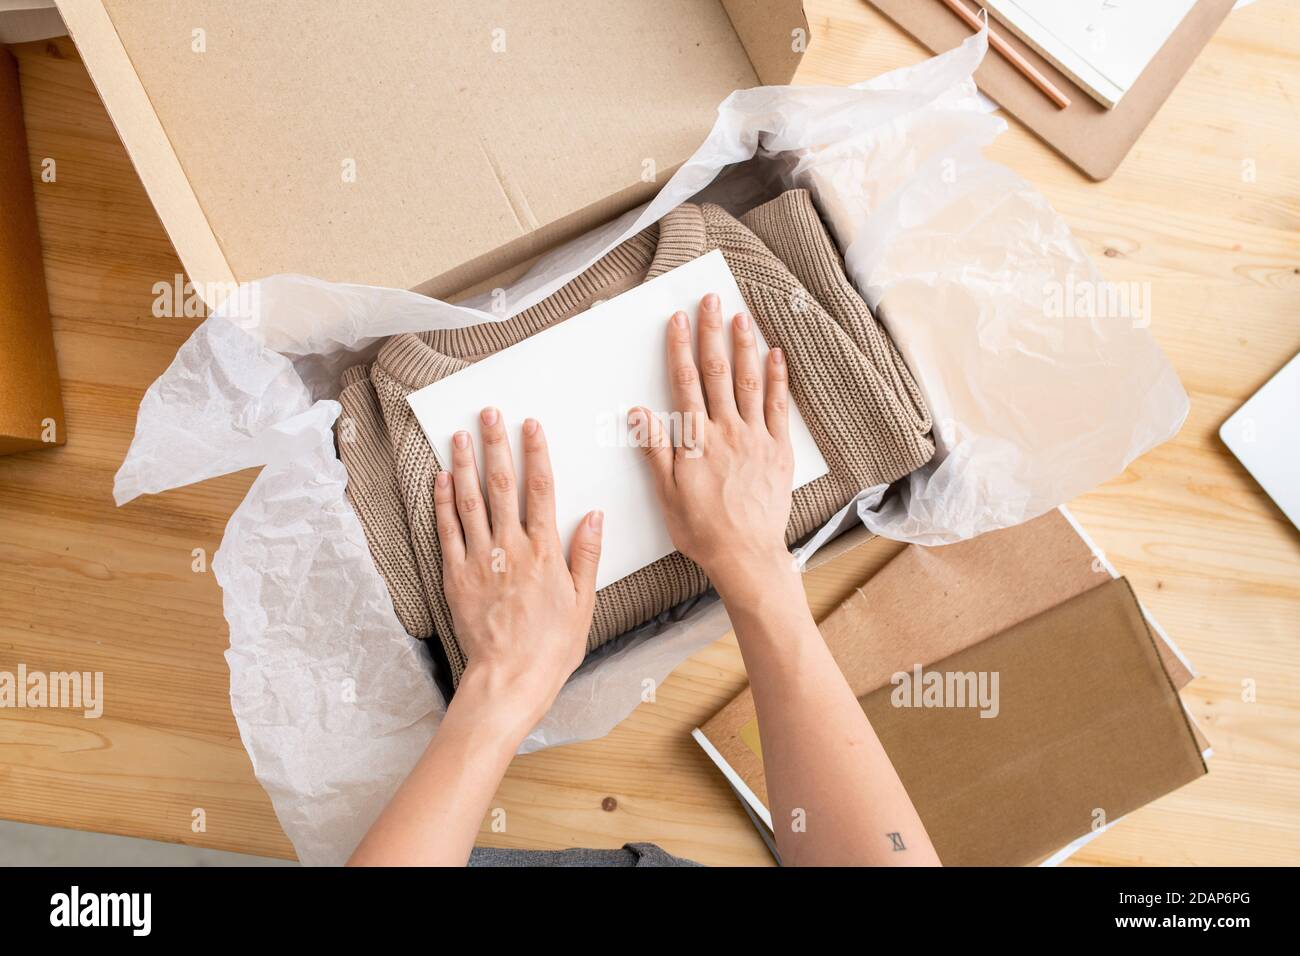 Hands of young manager of online shop putting paper on top of folded sweater Stock Photo